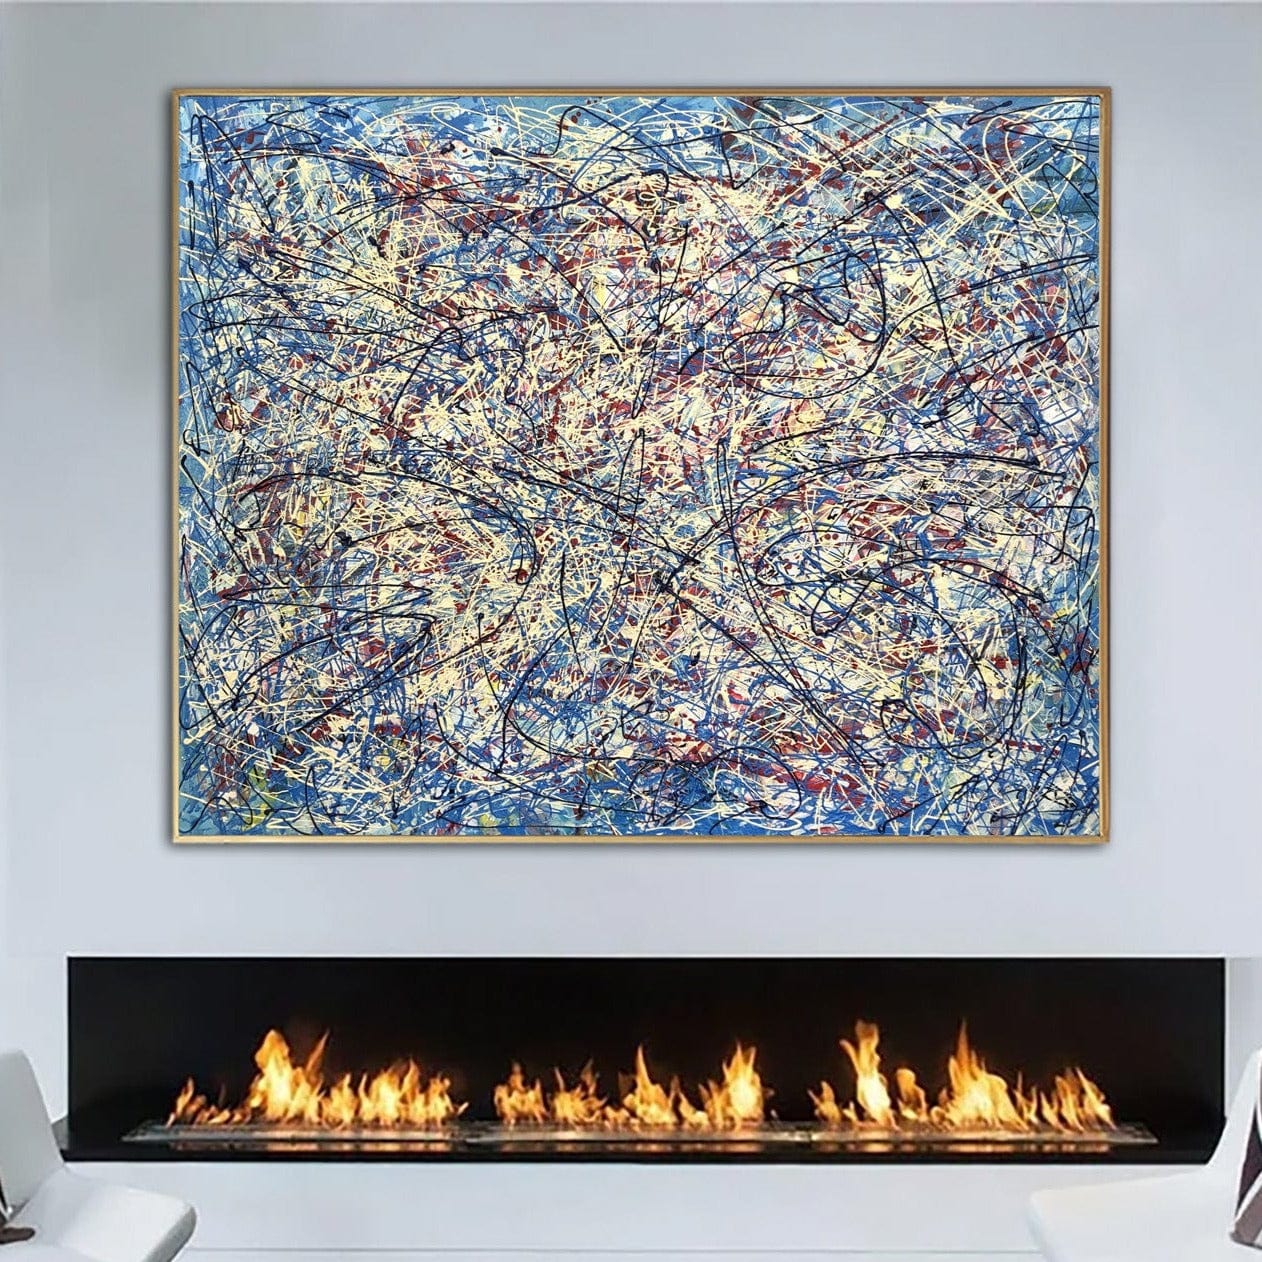 TOP 10 Most Famous Jackson Pollock Abstract Paintings slider2-image-1